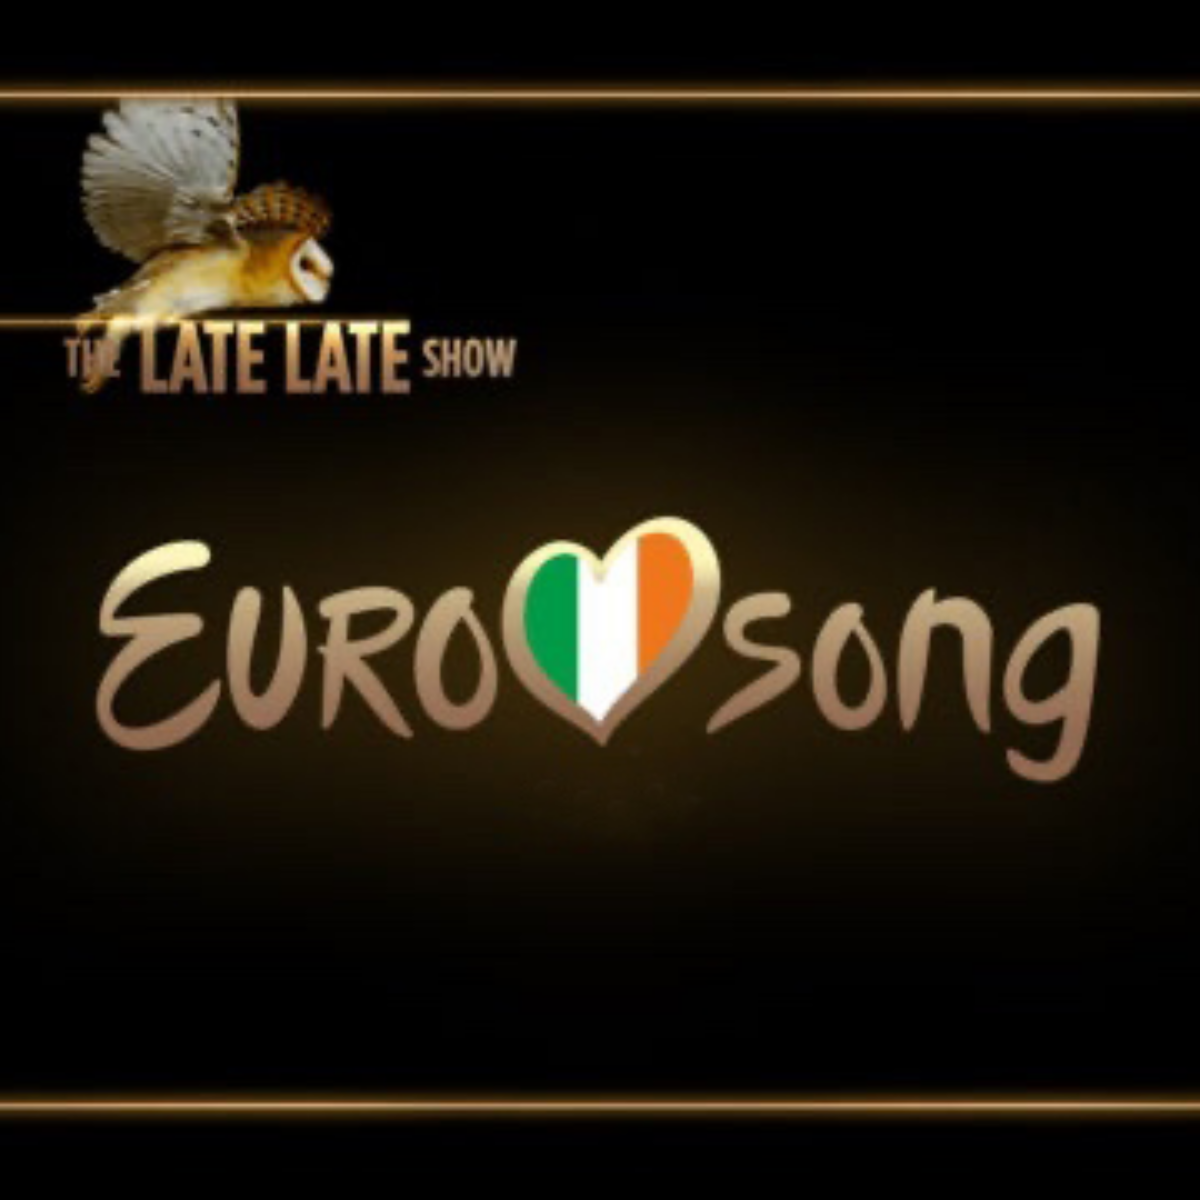 Ireland 🇮🇪 in the Eurovision Song Contest Eurosong 2023 cover artwork